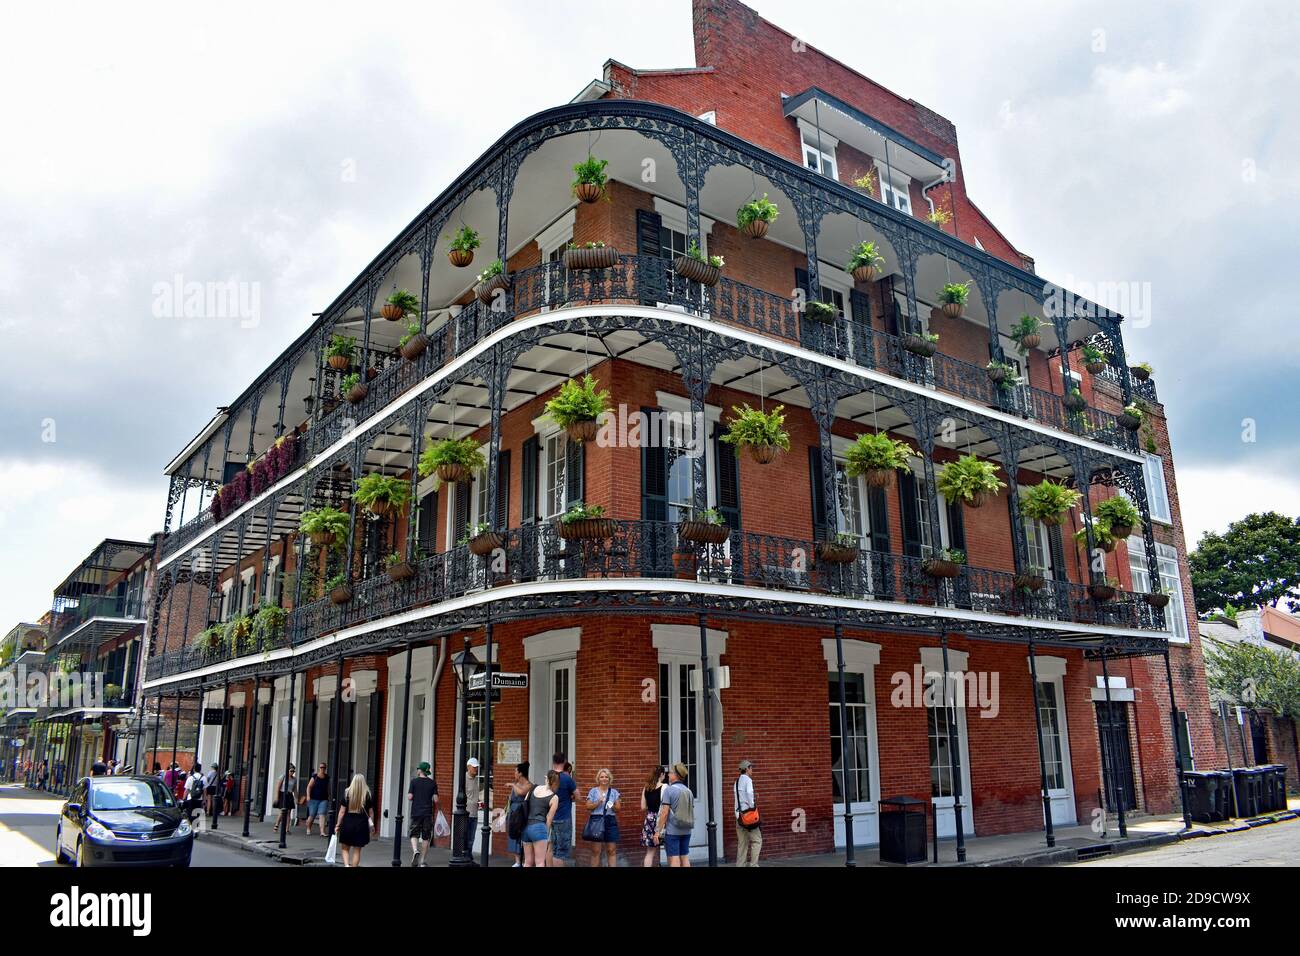 A traditional red brick building with ironwork galleries decorated with flowers and hanging baskets at Royal Street & Dumaine Street, New Orleans, USA Stock Photo